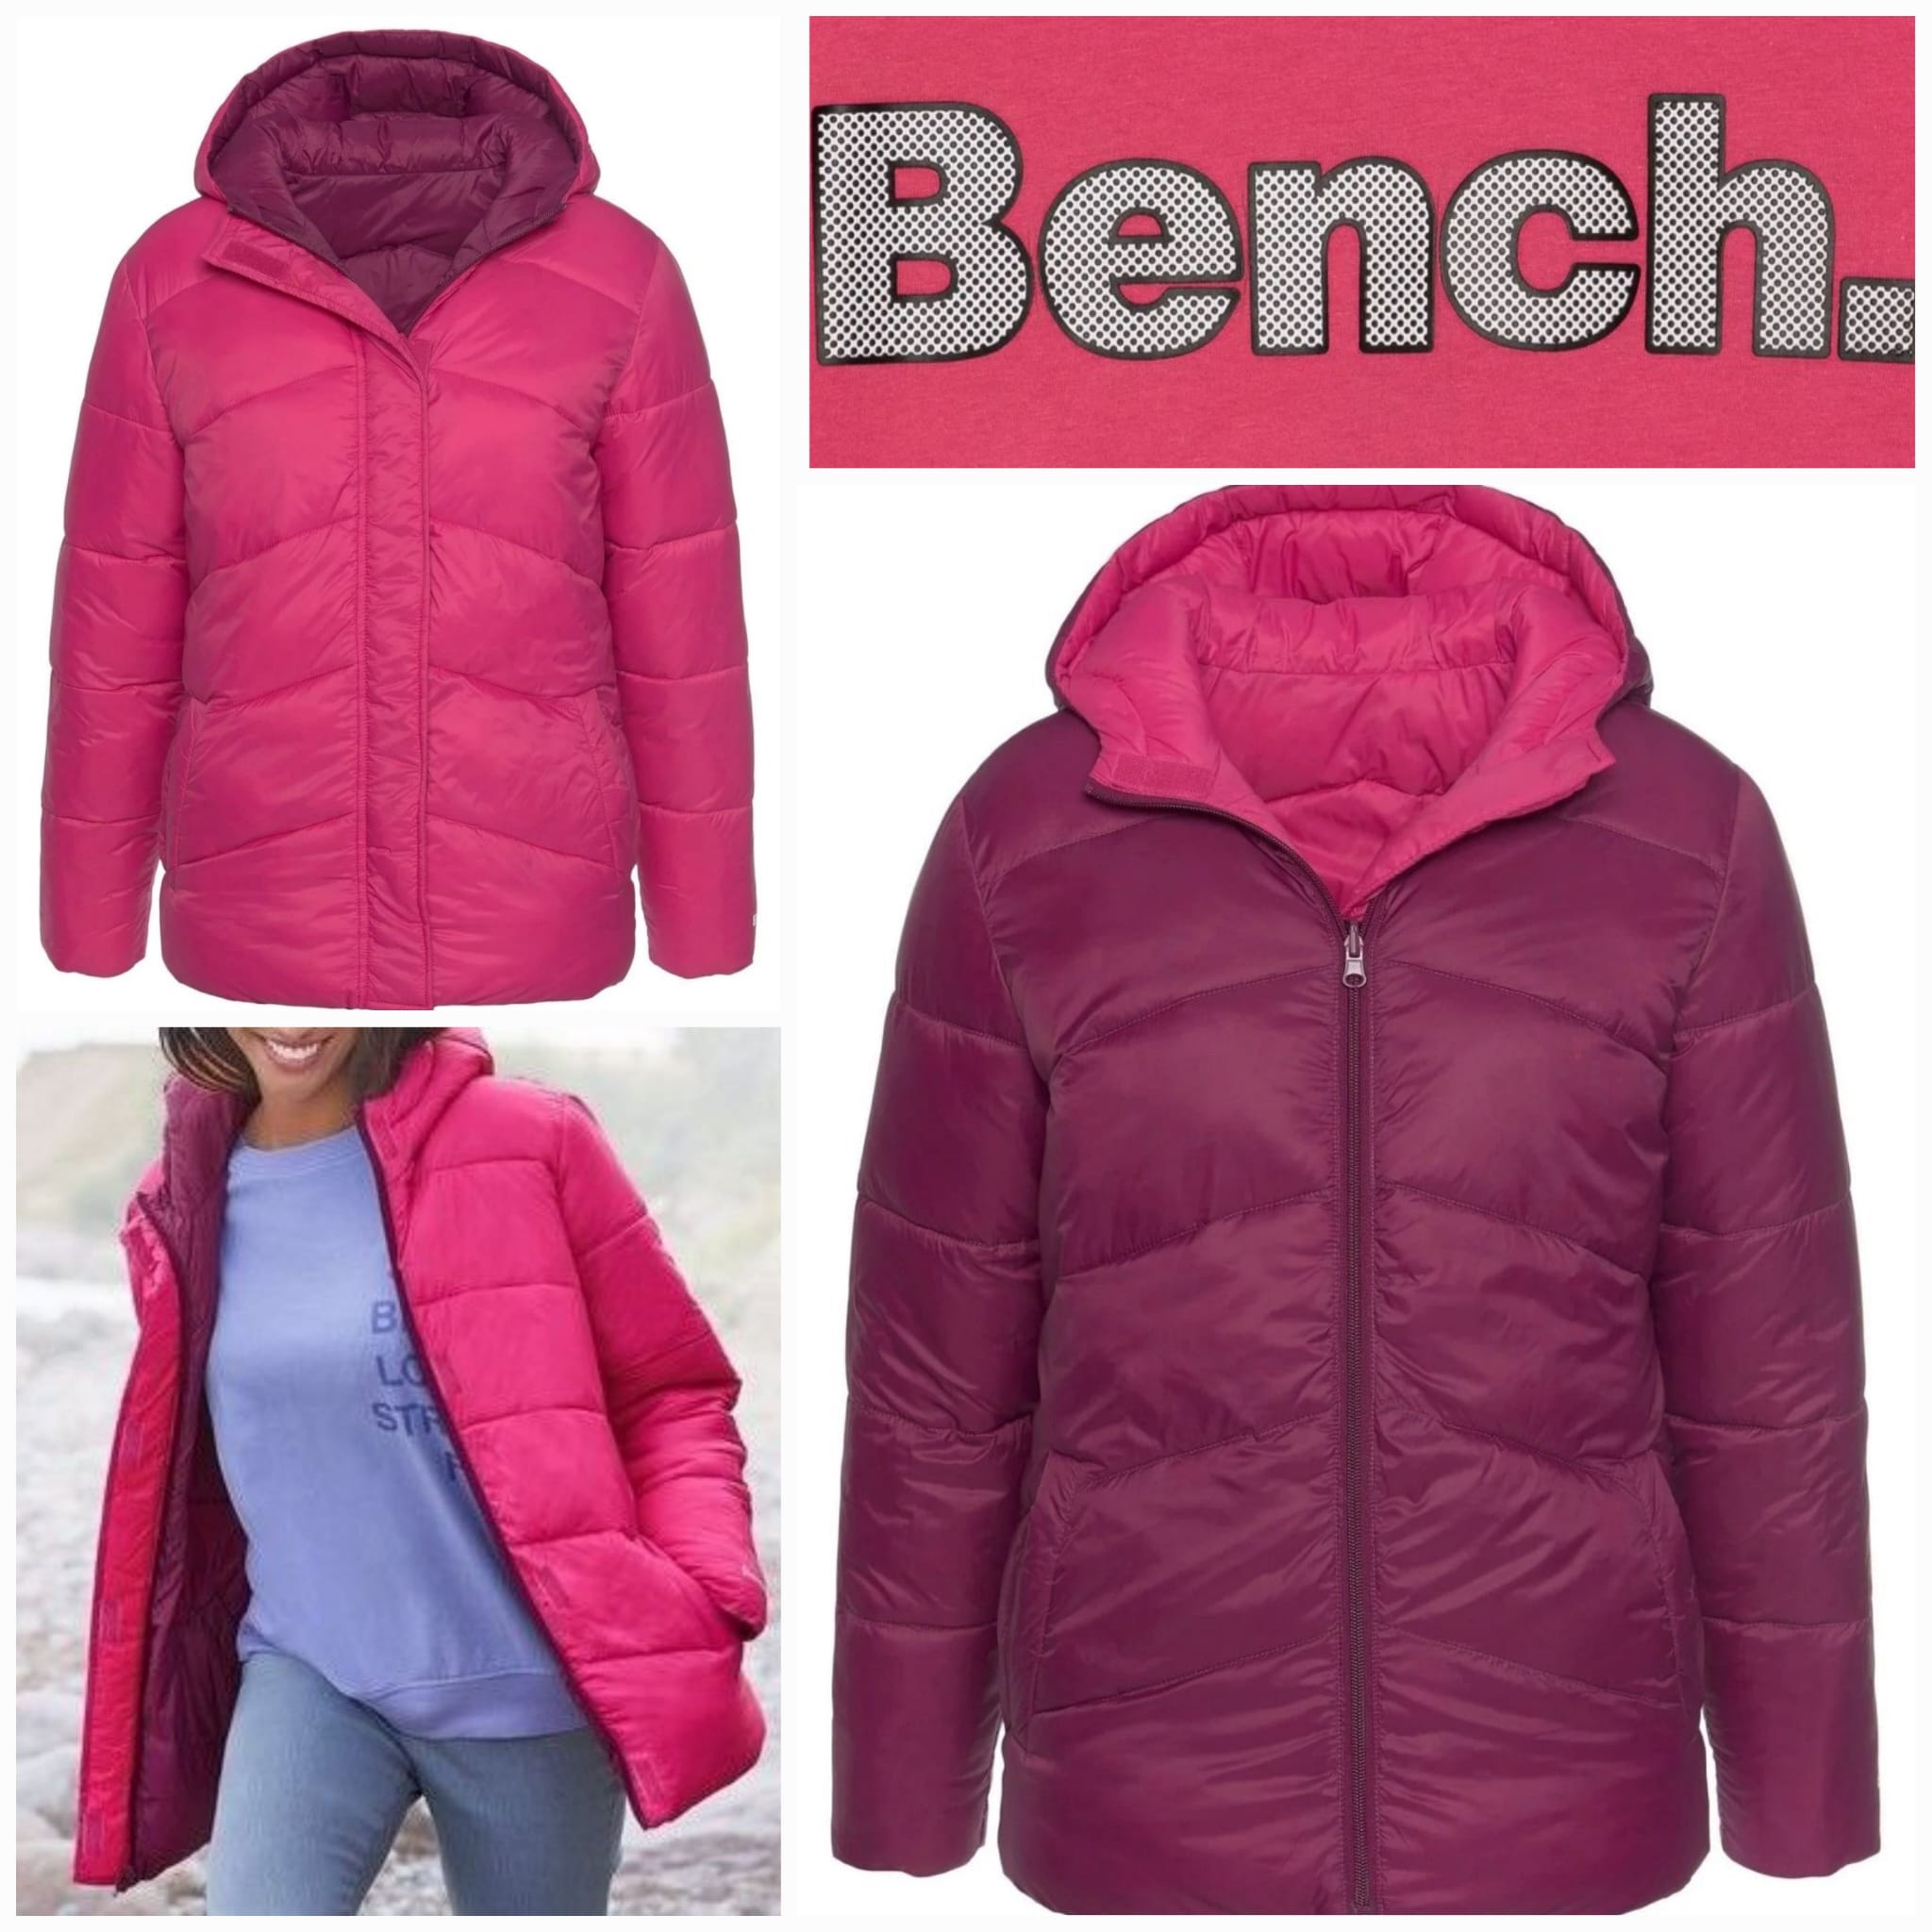 Brightly coloured women's reversible jackets from Bench